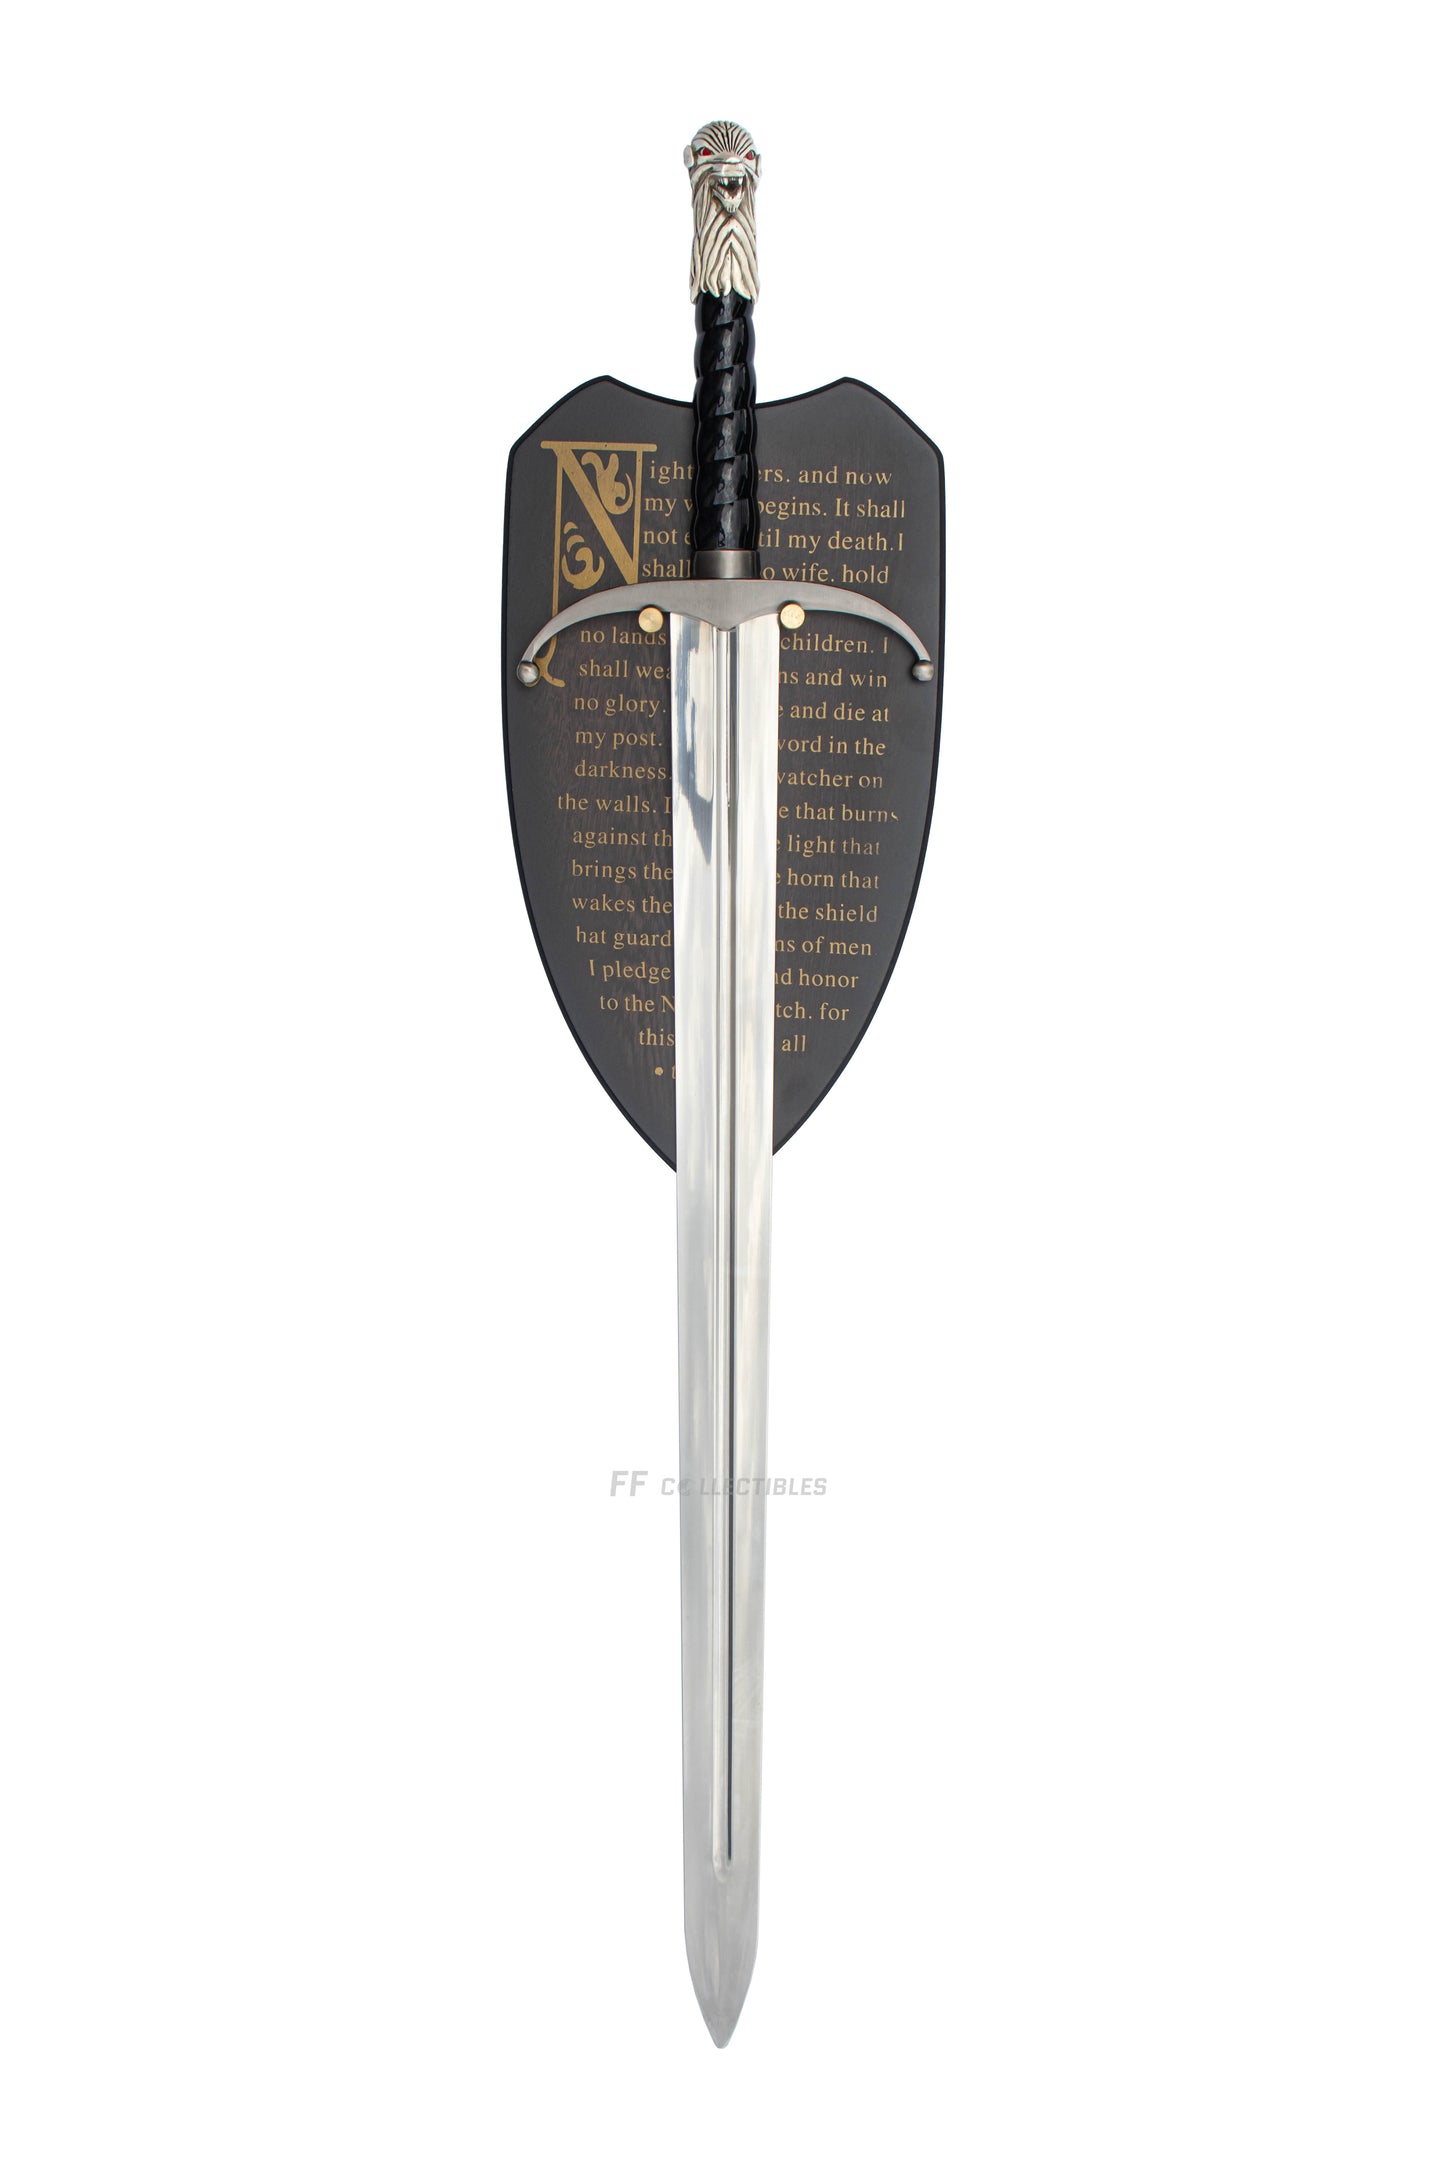 GAME OF THRONES - LONGCLAW + ICE, FATHER and SON BUNDLE (with FREE wall plaques)